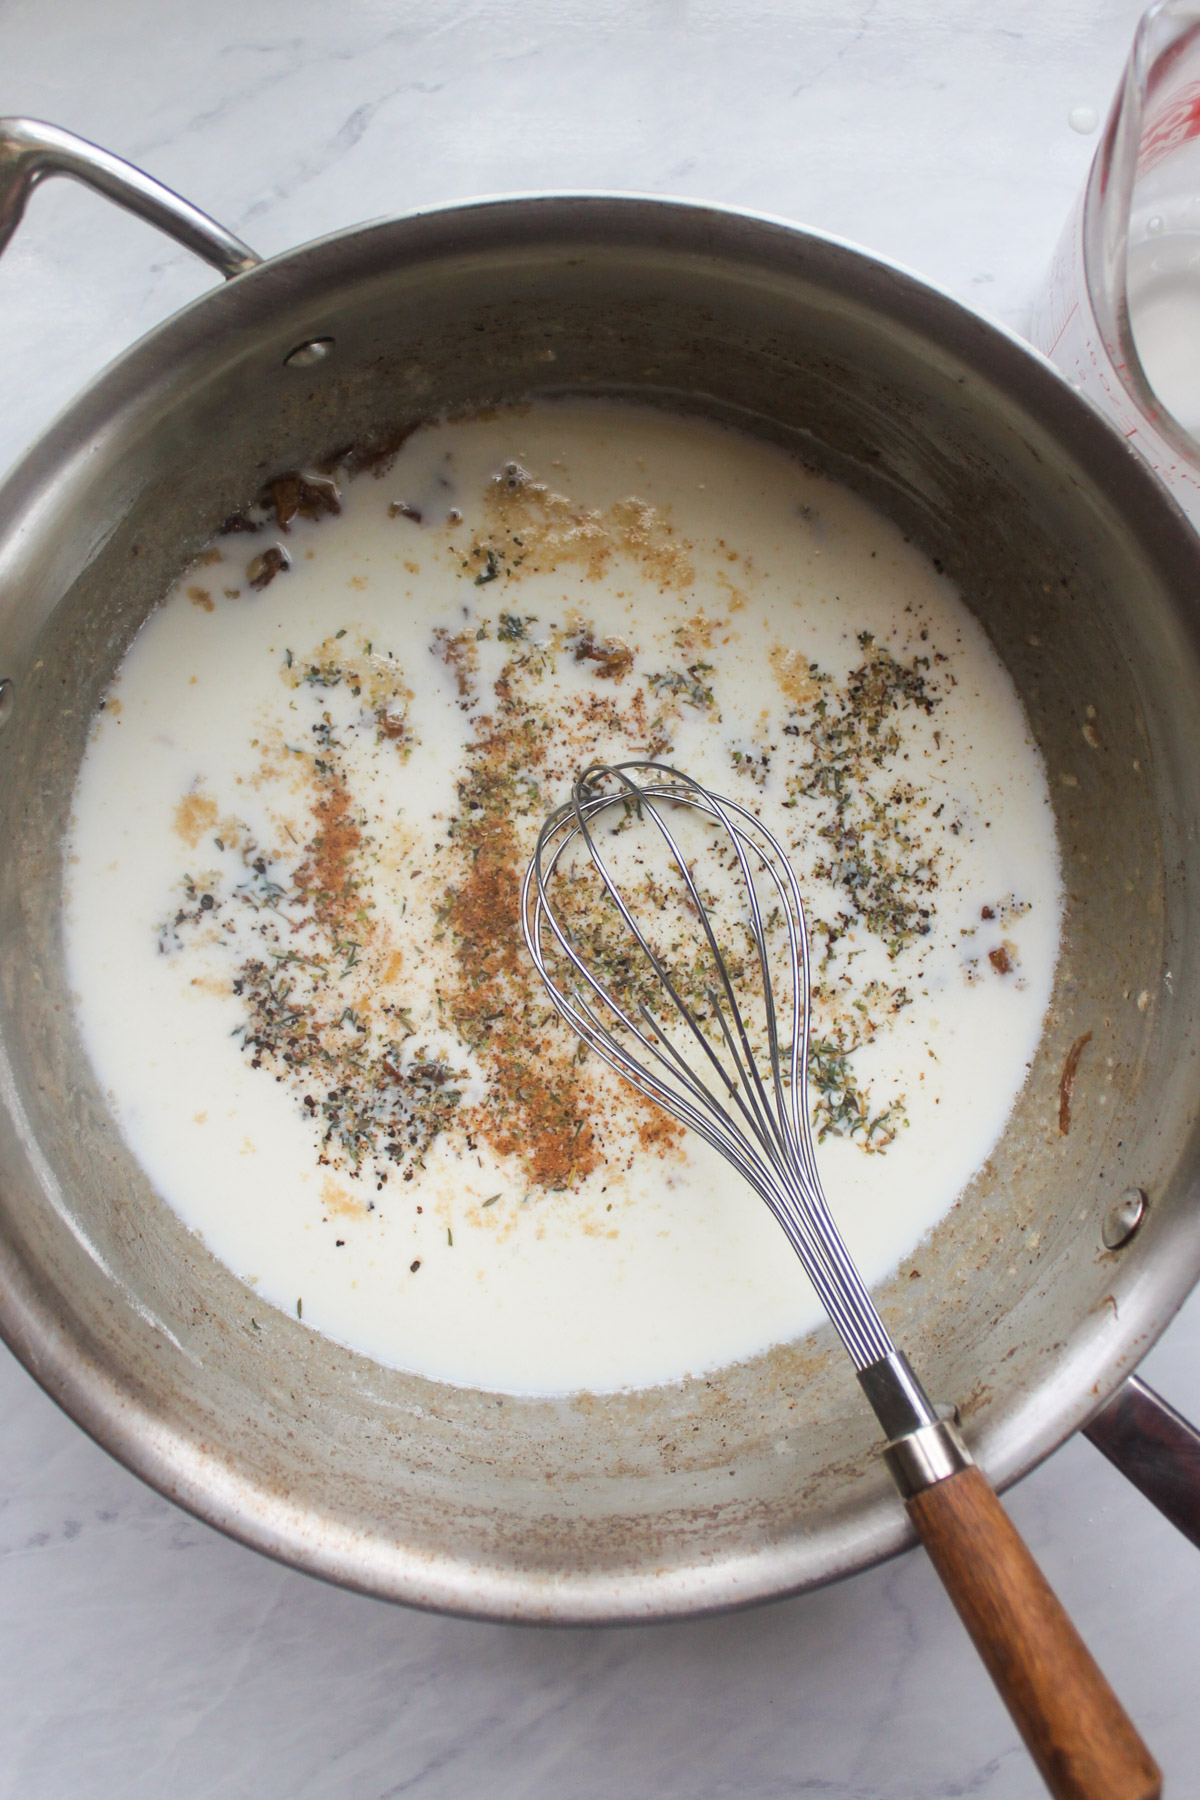 Milk and seasonings added to the roux in a skillet with a whisk.